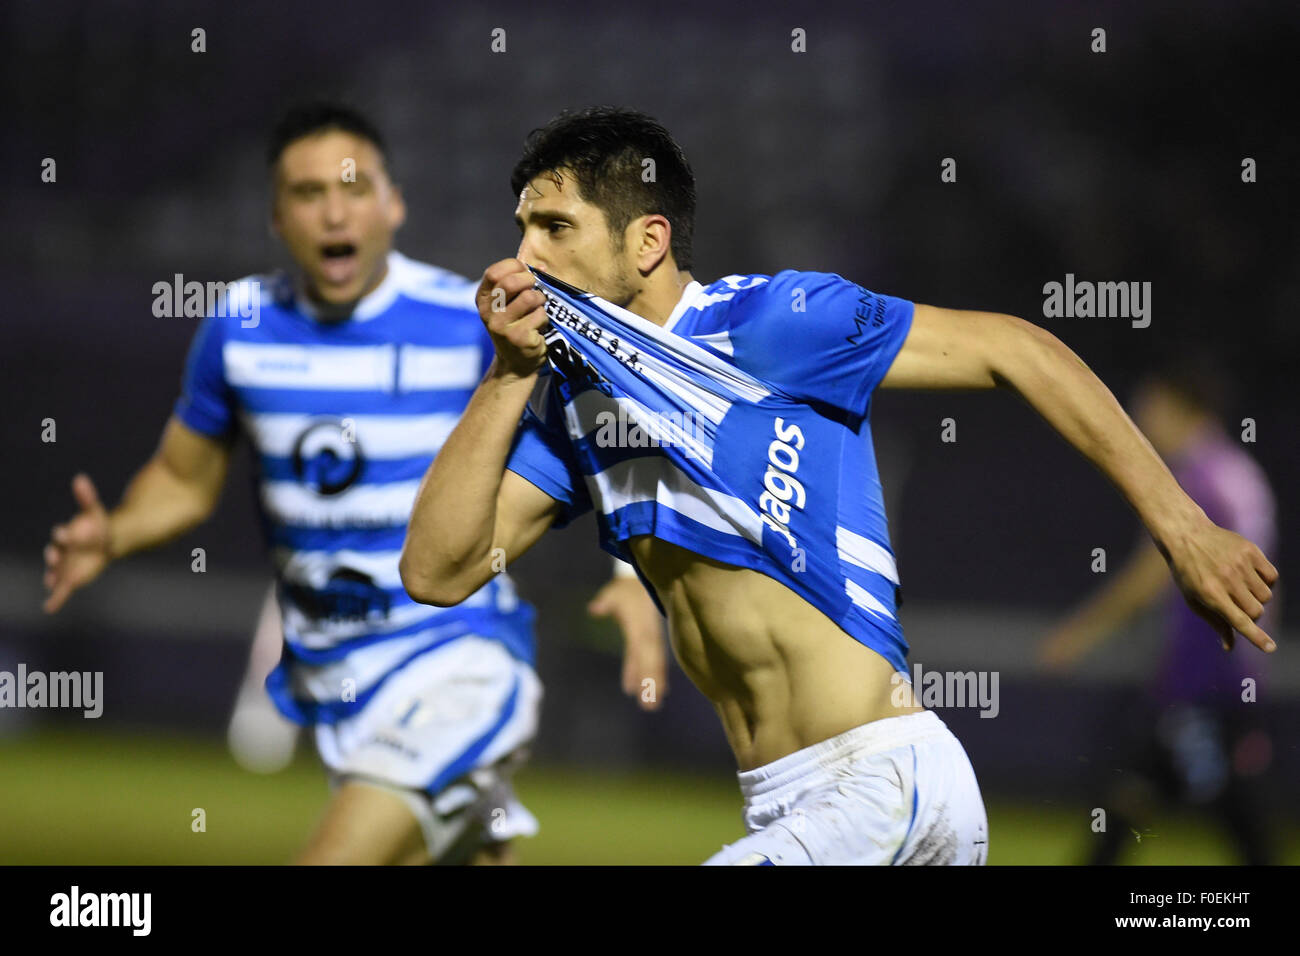 Montevideo, Uruguay. 13th Aug, 2015. Matias Duffard of Uruguay' Juventud celebrates after scoring during the match group 1 for the first phase of South America Cup against Bolivia's Real Potosi at Luis Franzini, in Montevideo, capital of Uruguay, on Aug. 13, 2015. Credit:  Nicolas Celaya/Xinhua/Alamy Live News Stock Photo